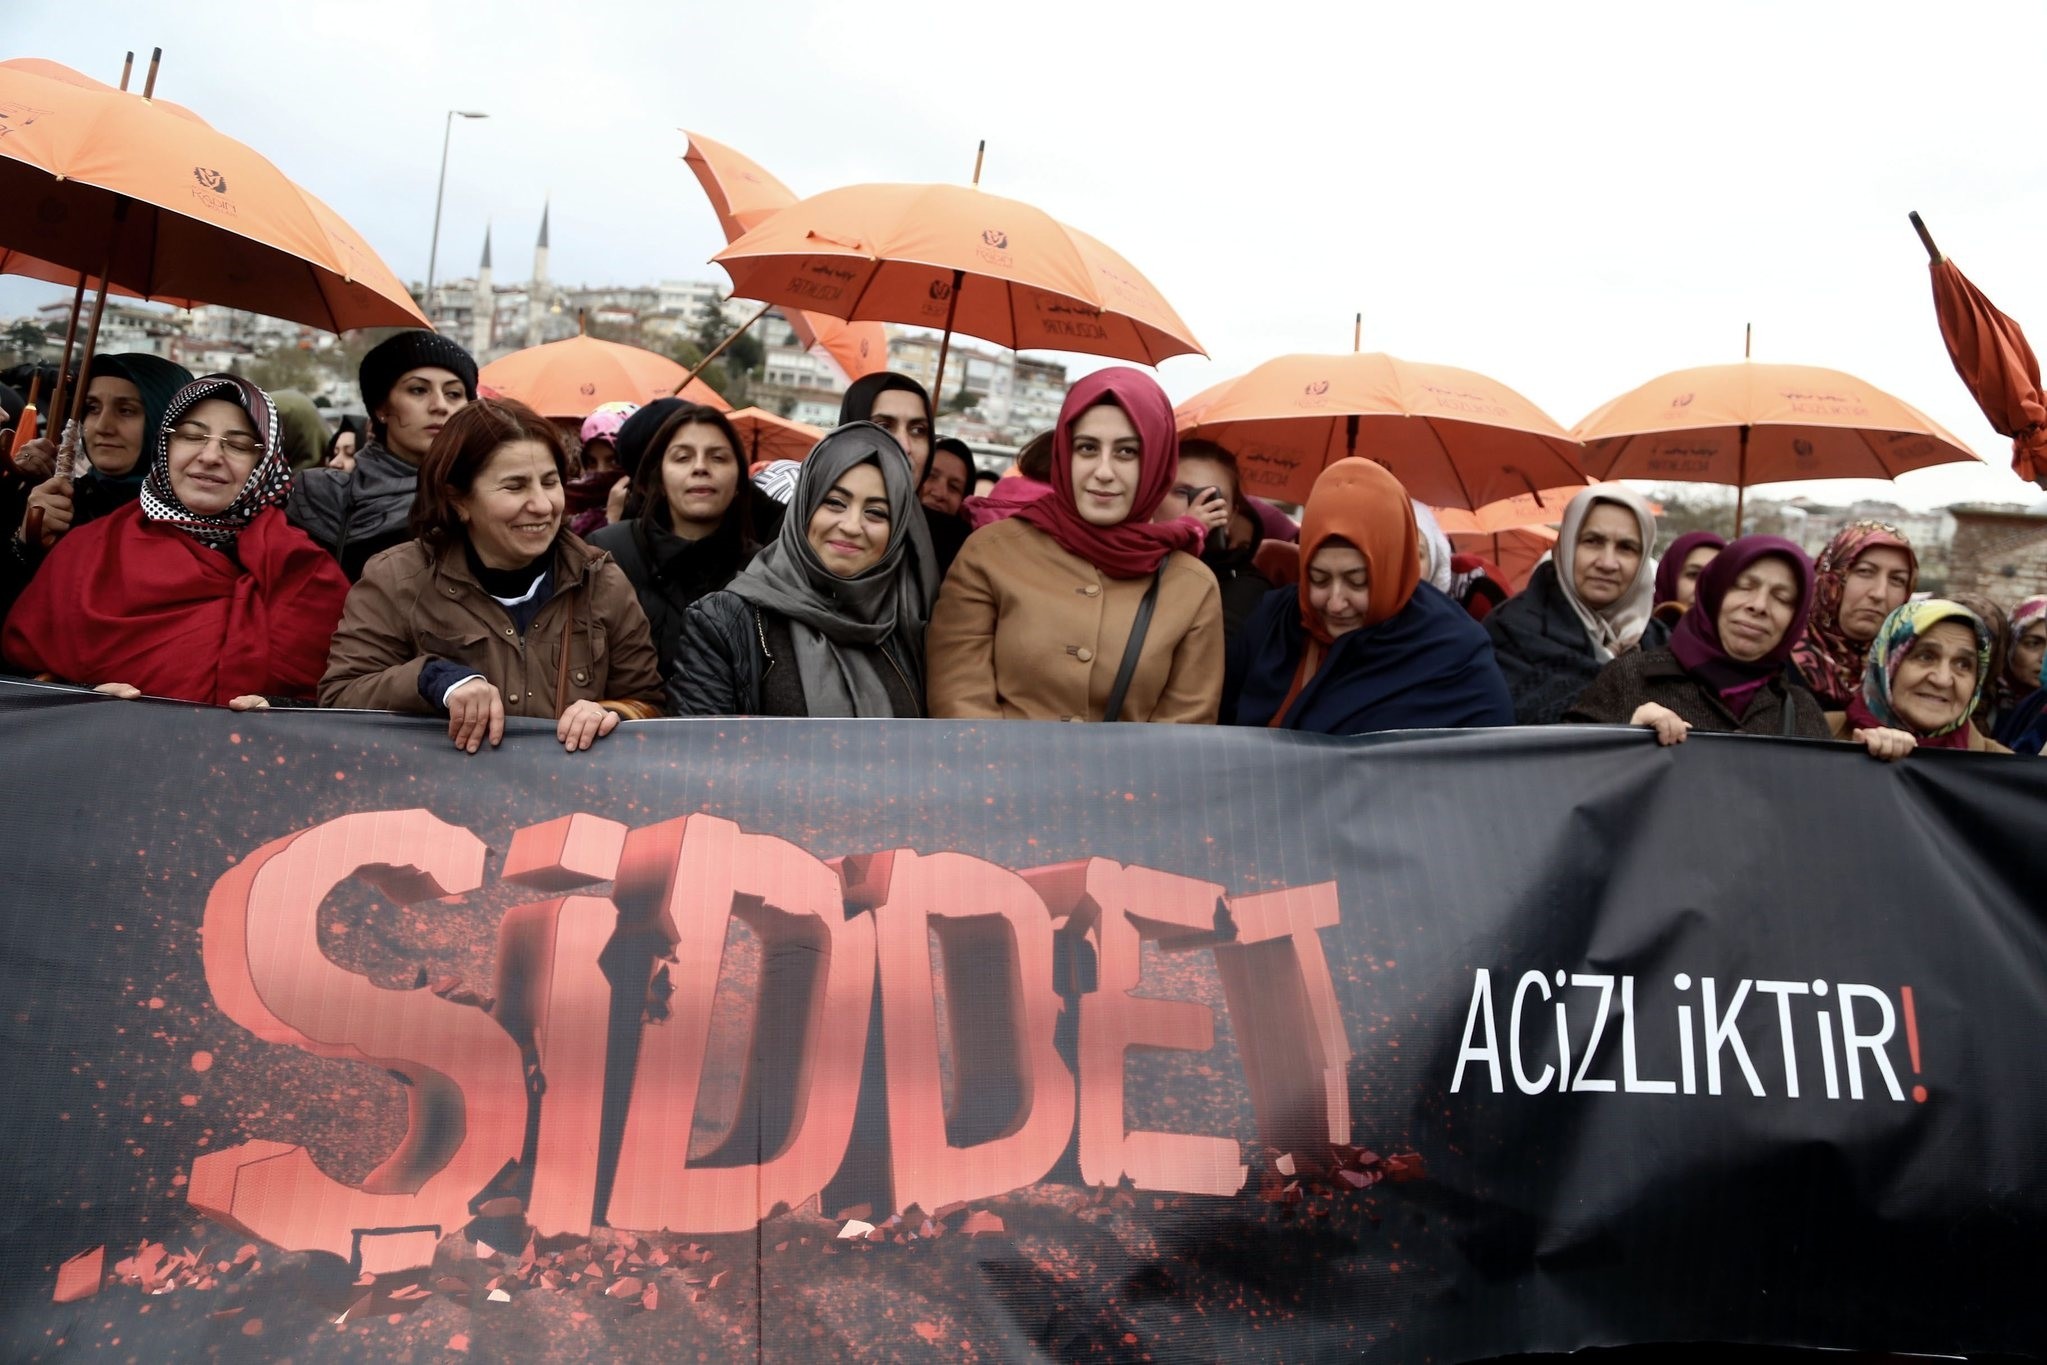 Female members of the AK Party hold a demonstration in u00dcsku00fcdar, Istanbul against violence. The placard says, u201cViolence is weakness.u201d 